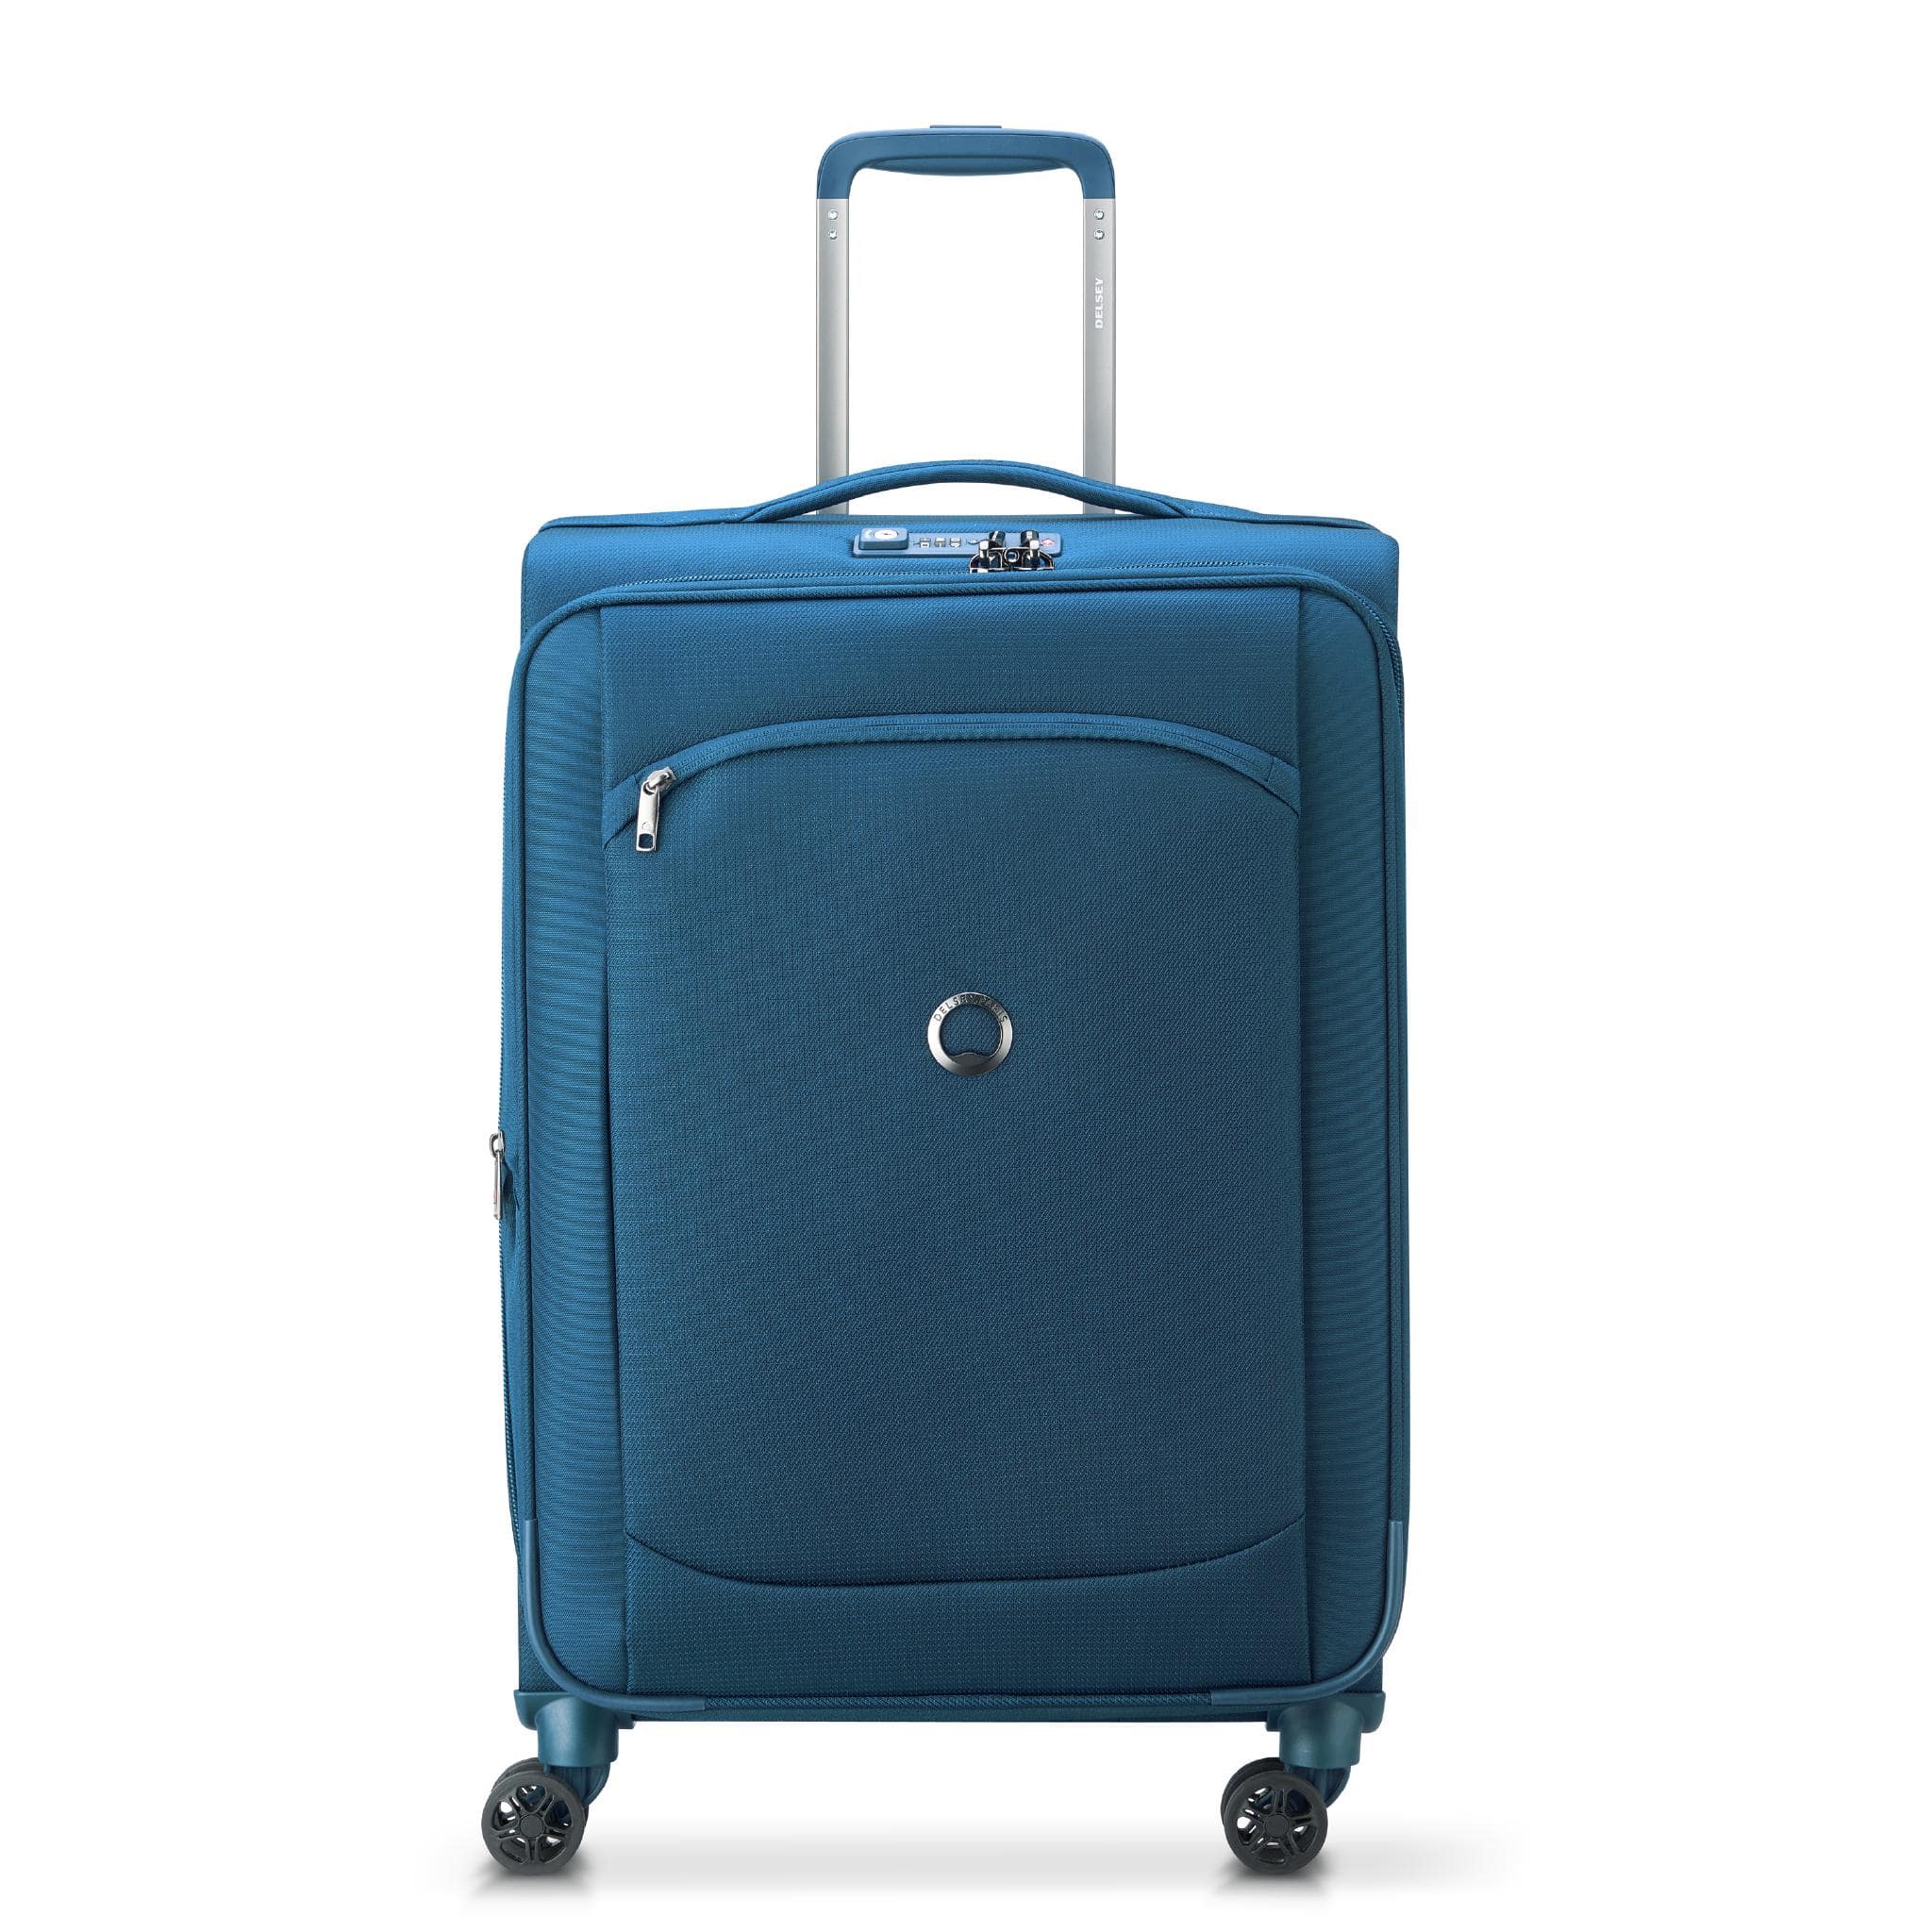 MONTMARTRE AIR 2.0 Soft Side 4W Luggage..